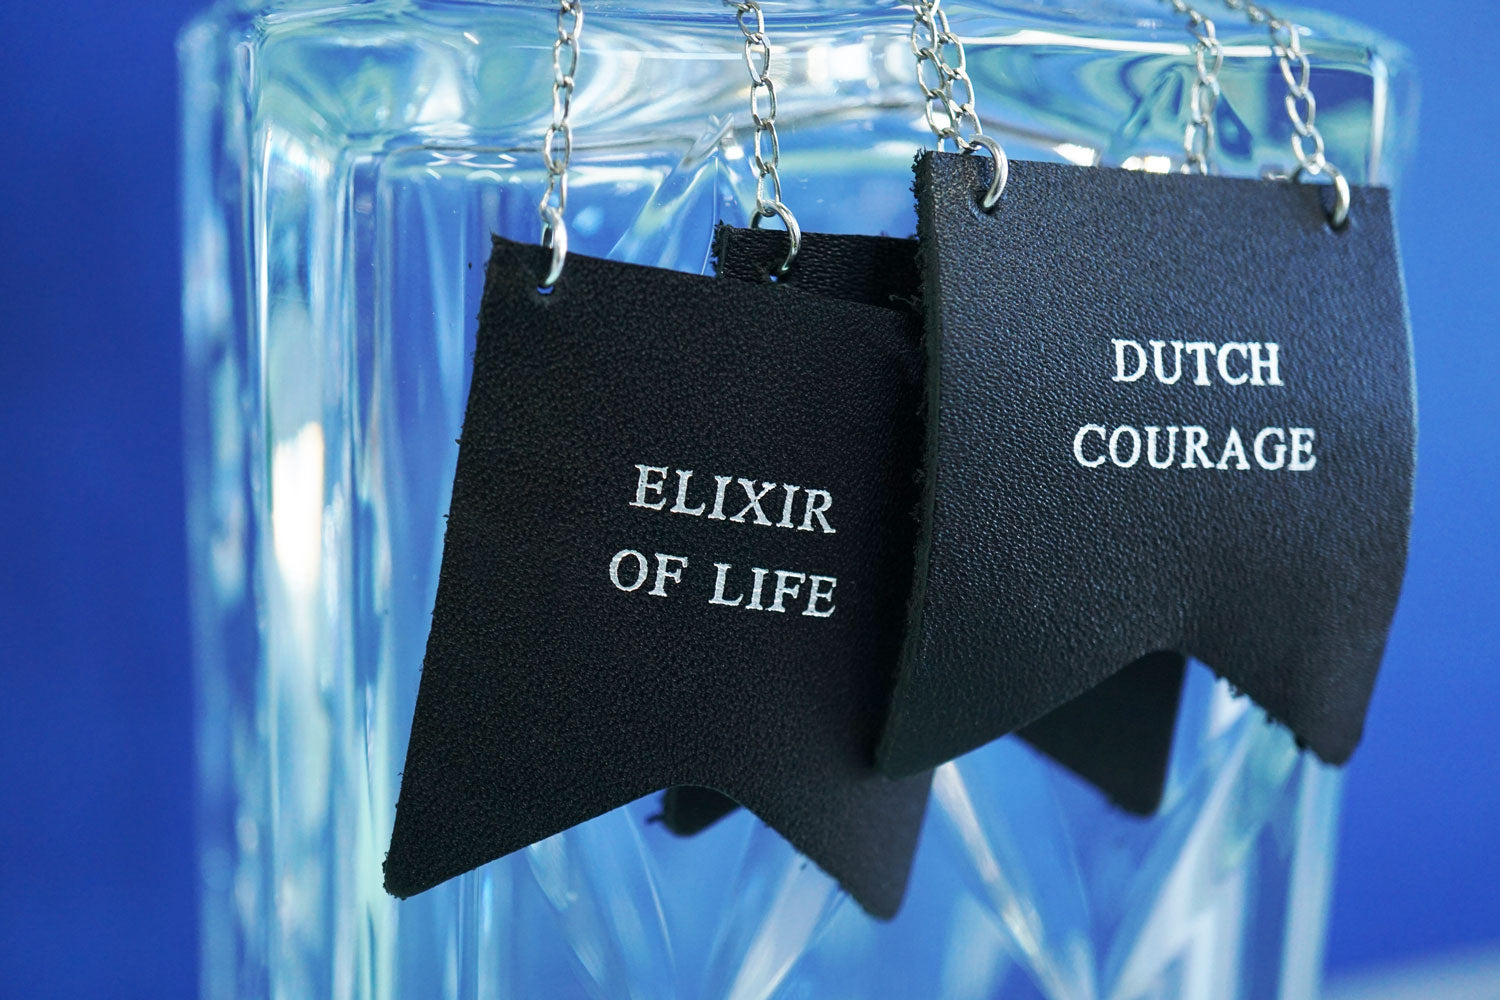 Personalised bottle label from Bookshell Bindery, 3 labels hanging on a glass decanter, embossed with the text Elixir of life and Dutch courage